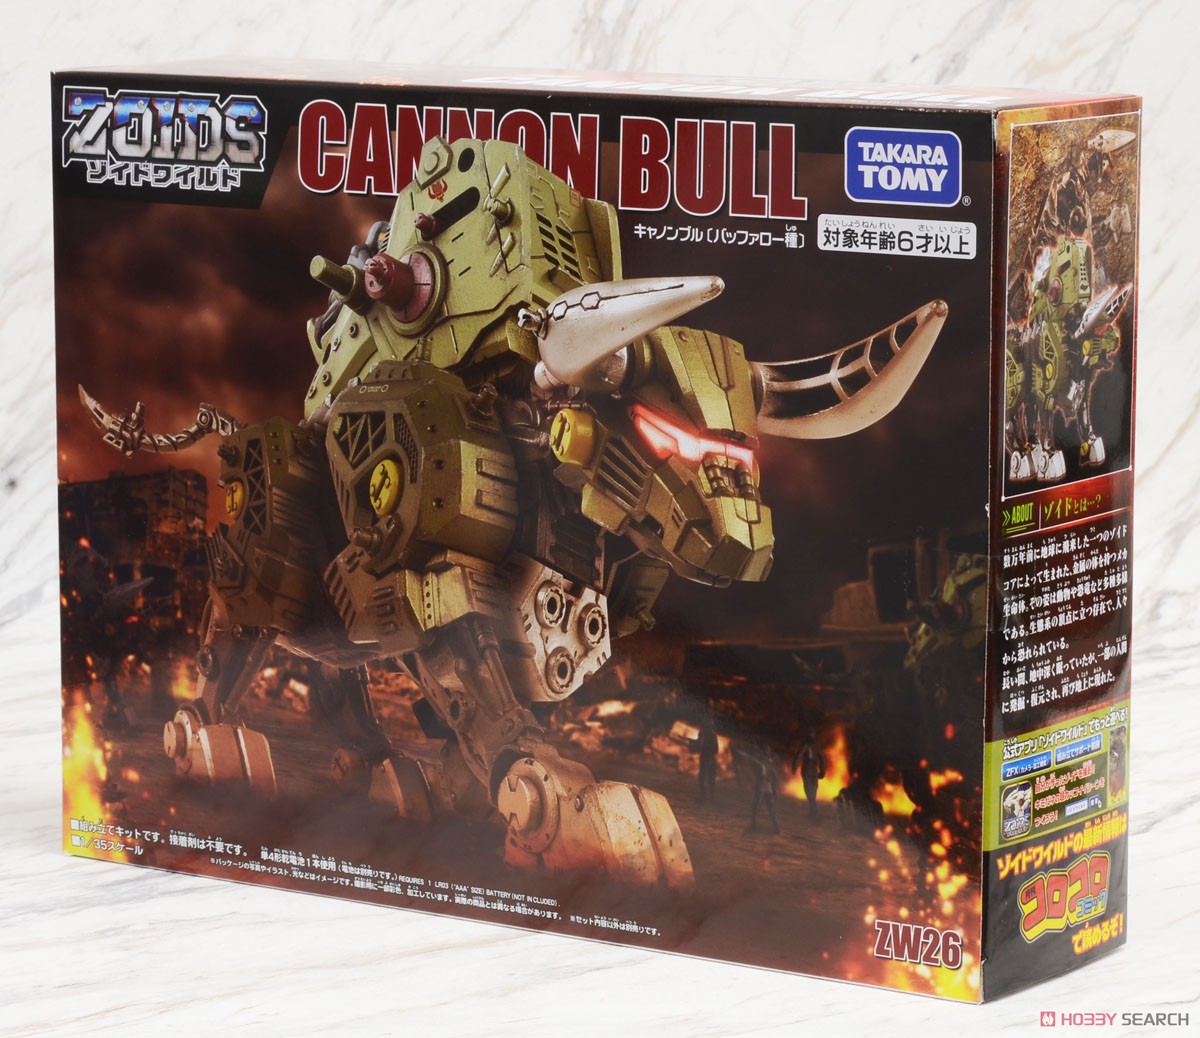 ZW26 Cannon Bull (Character Toy) Package1